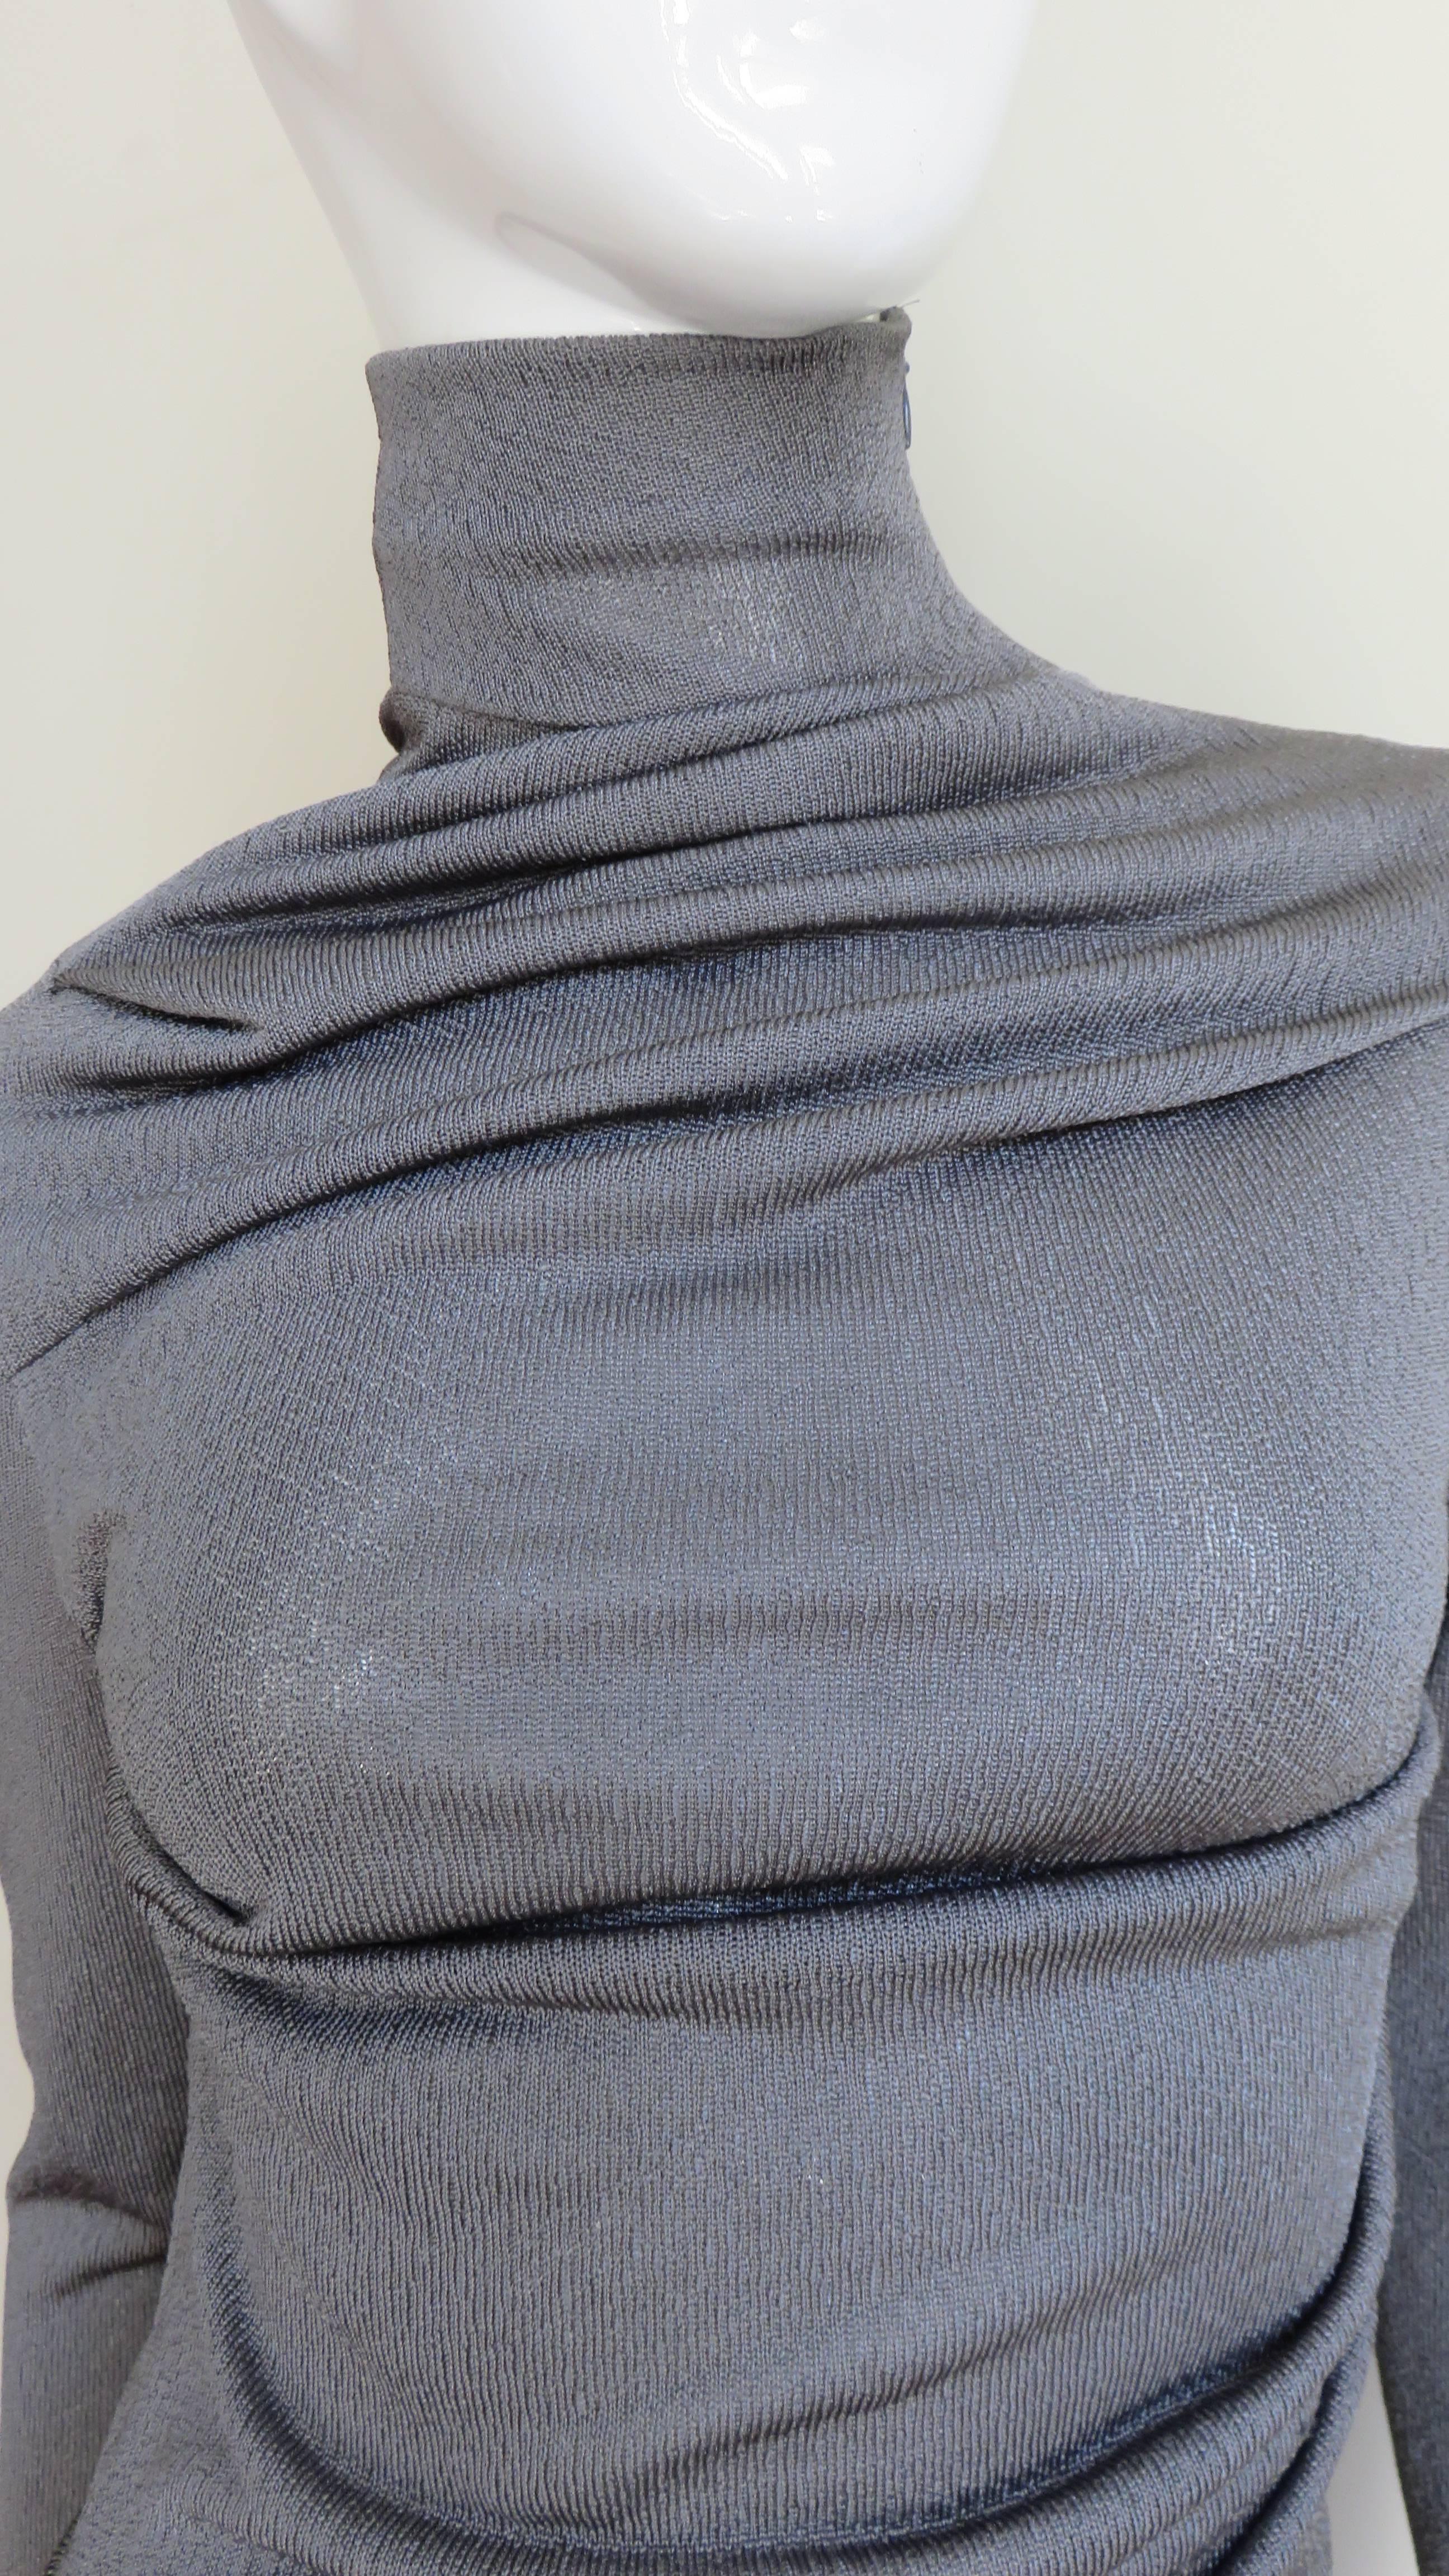 A fabulous draped top in a silvery grey silk knit by Alexander McQueen.  It has a stand up collar and long sleeves. The body drapes diagonally across the front and back creating beautiful lines.  It is unlined and has a shoulder/neck zipper on one